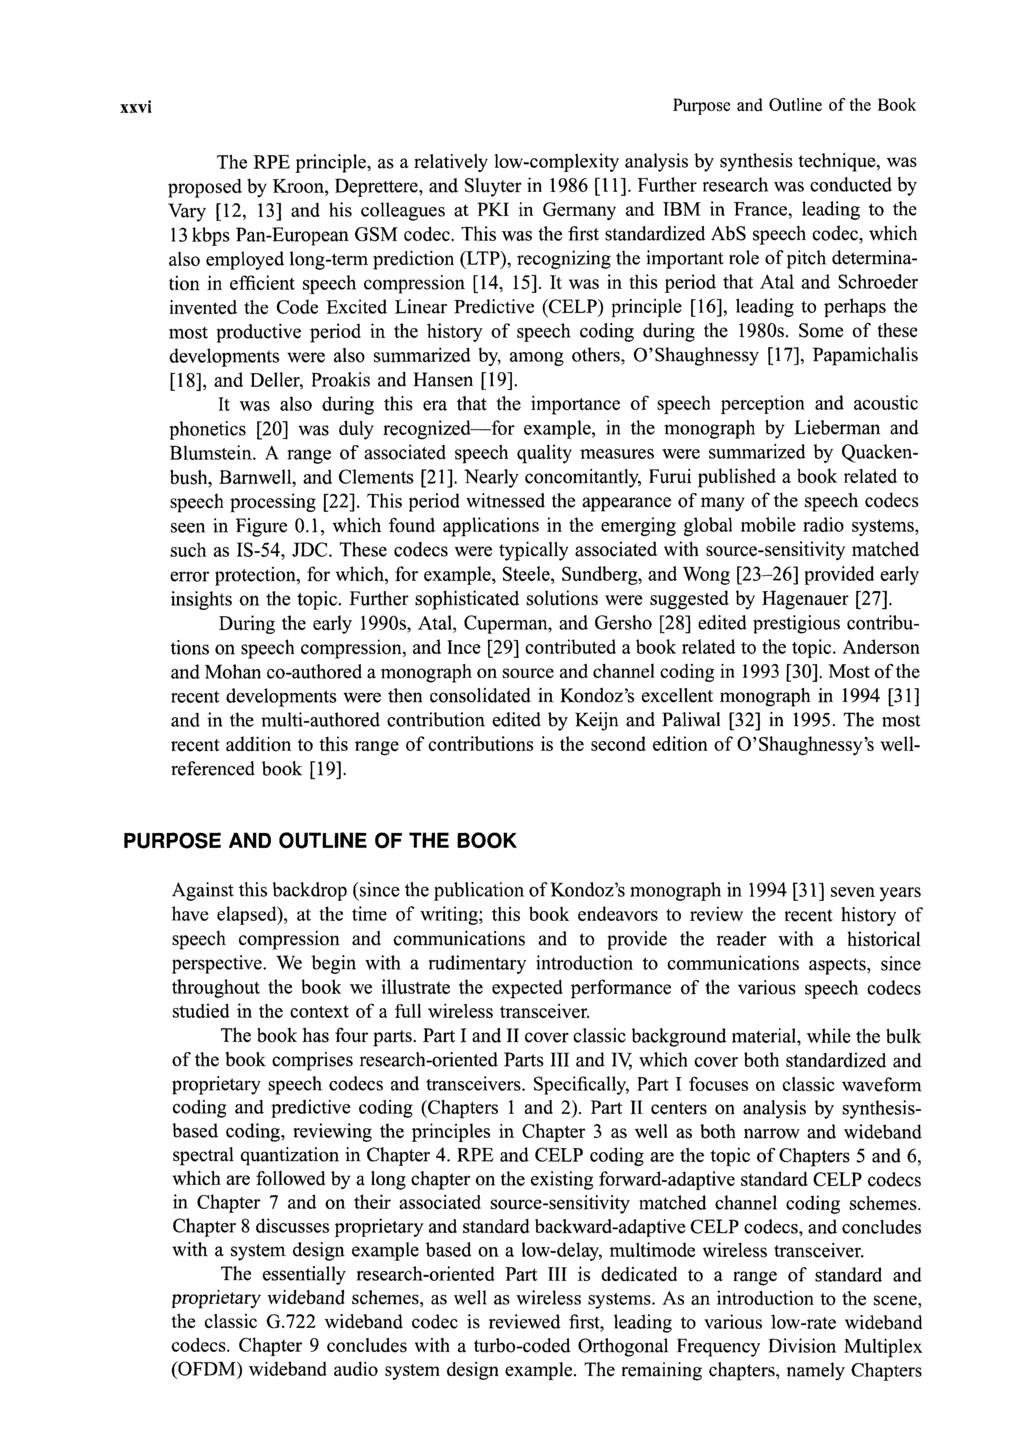 xxvi Purpose and Outline of the Book The RPE principle, as a relatively low-complexity analysis by synthesis technique, was proposed by Kroon, Deprettere, and Sluyter in 1986 [11].